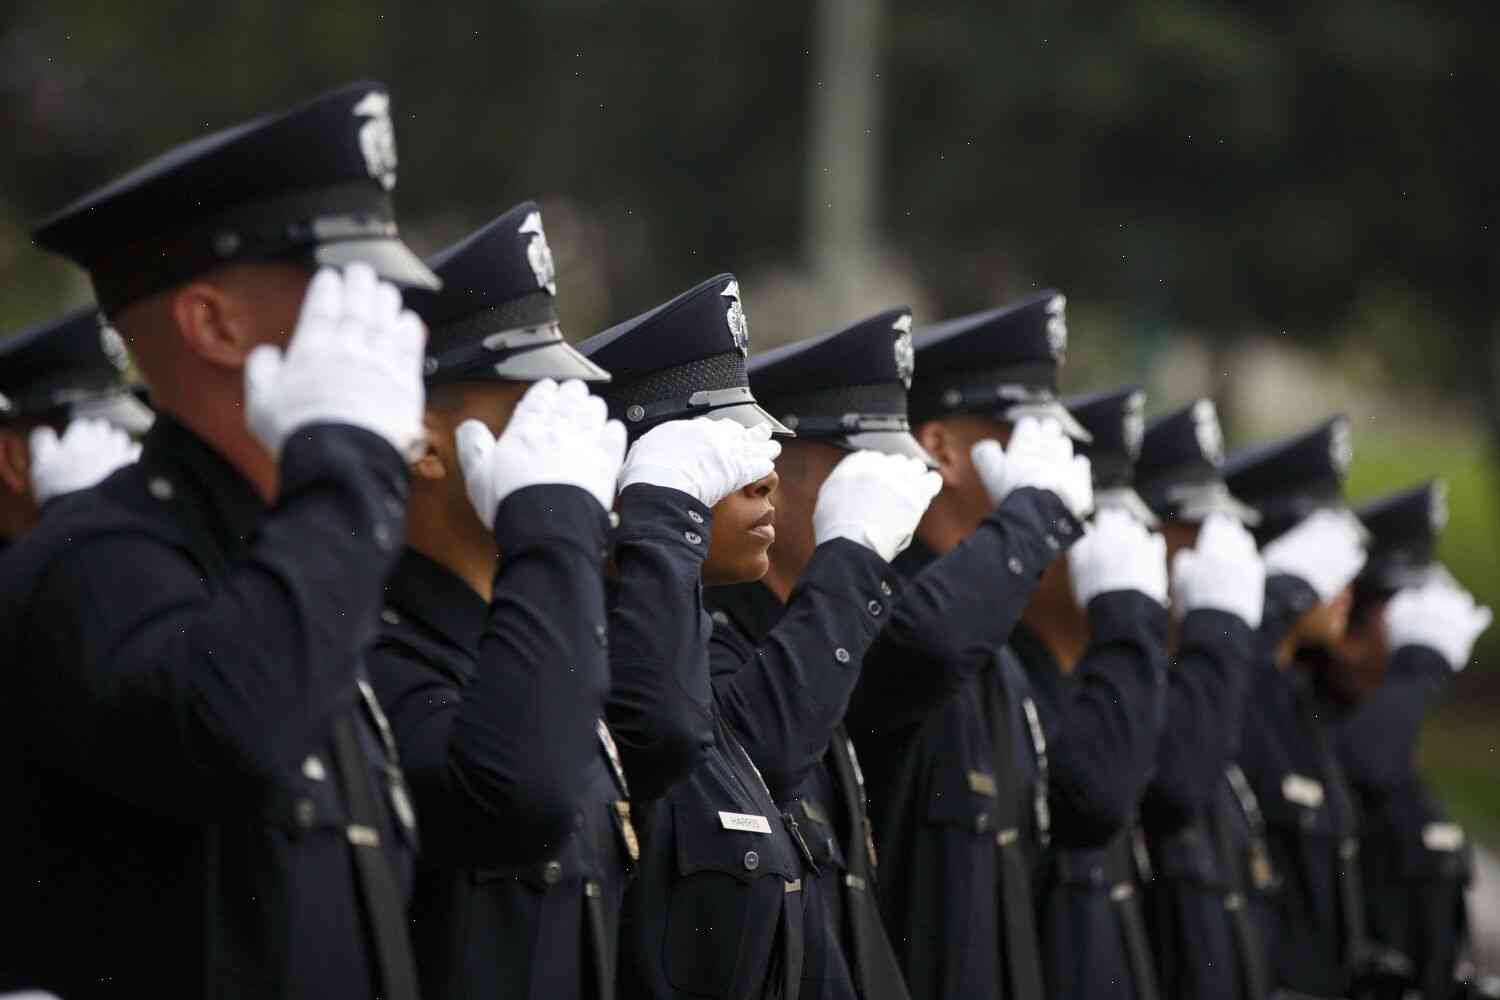 LAPD's civilian-panel discipline system has not changed, report finds